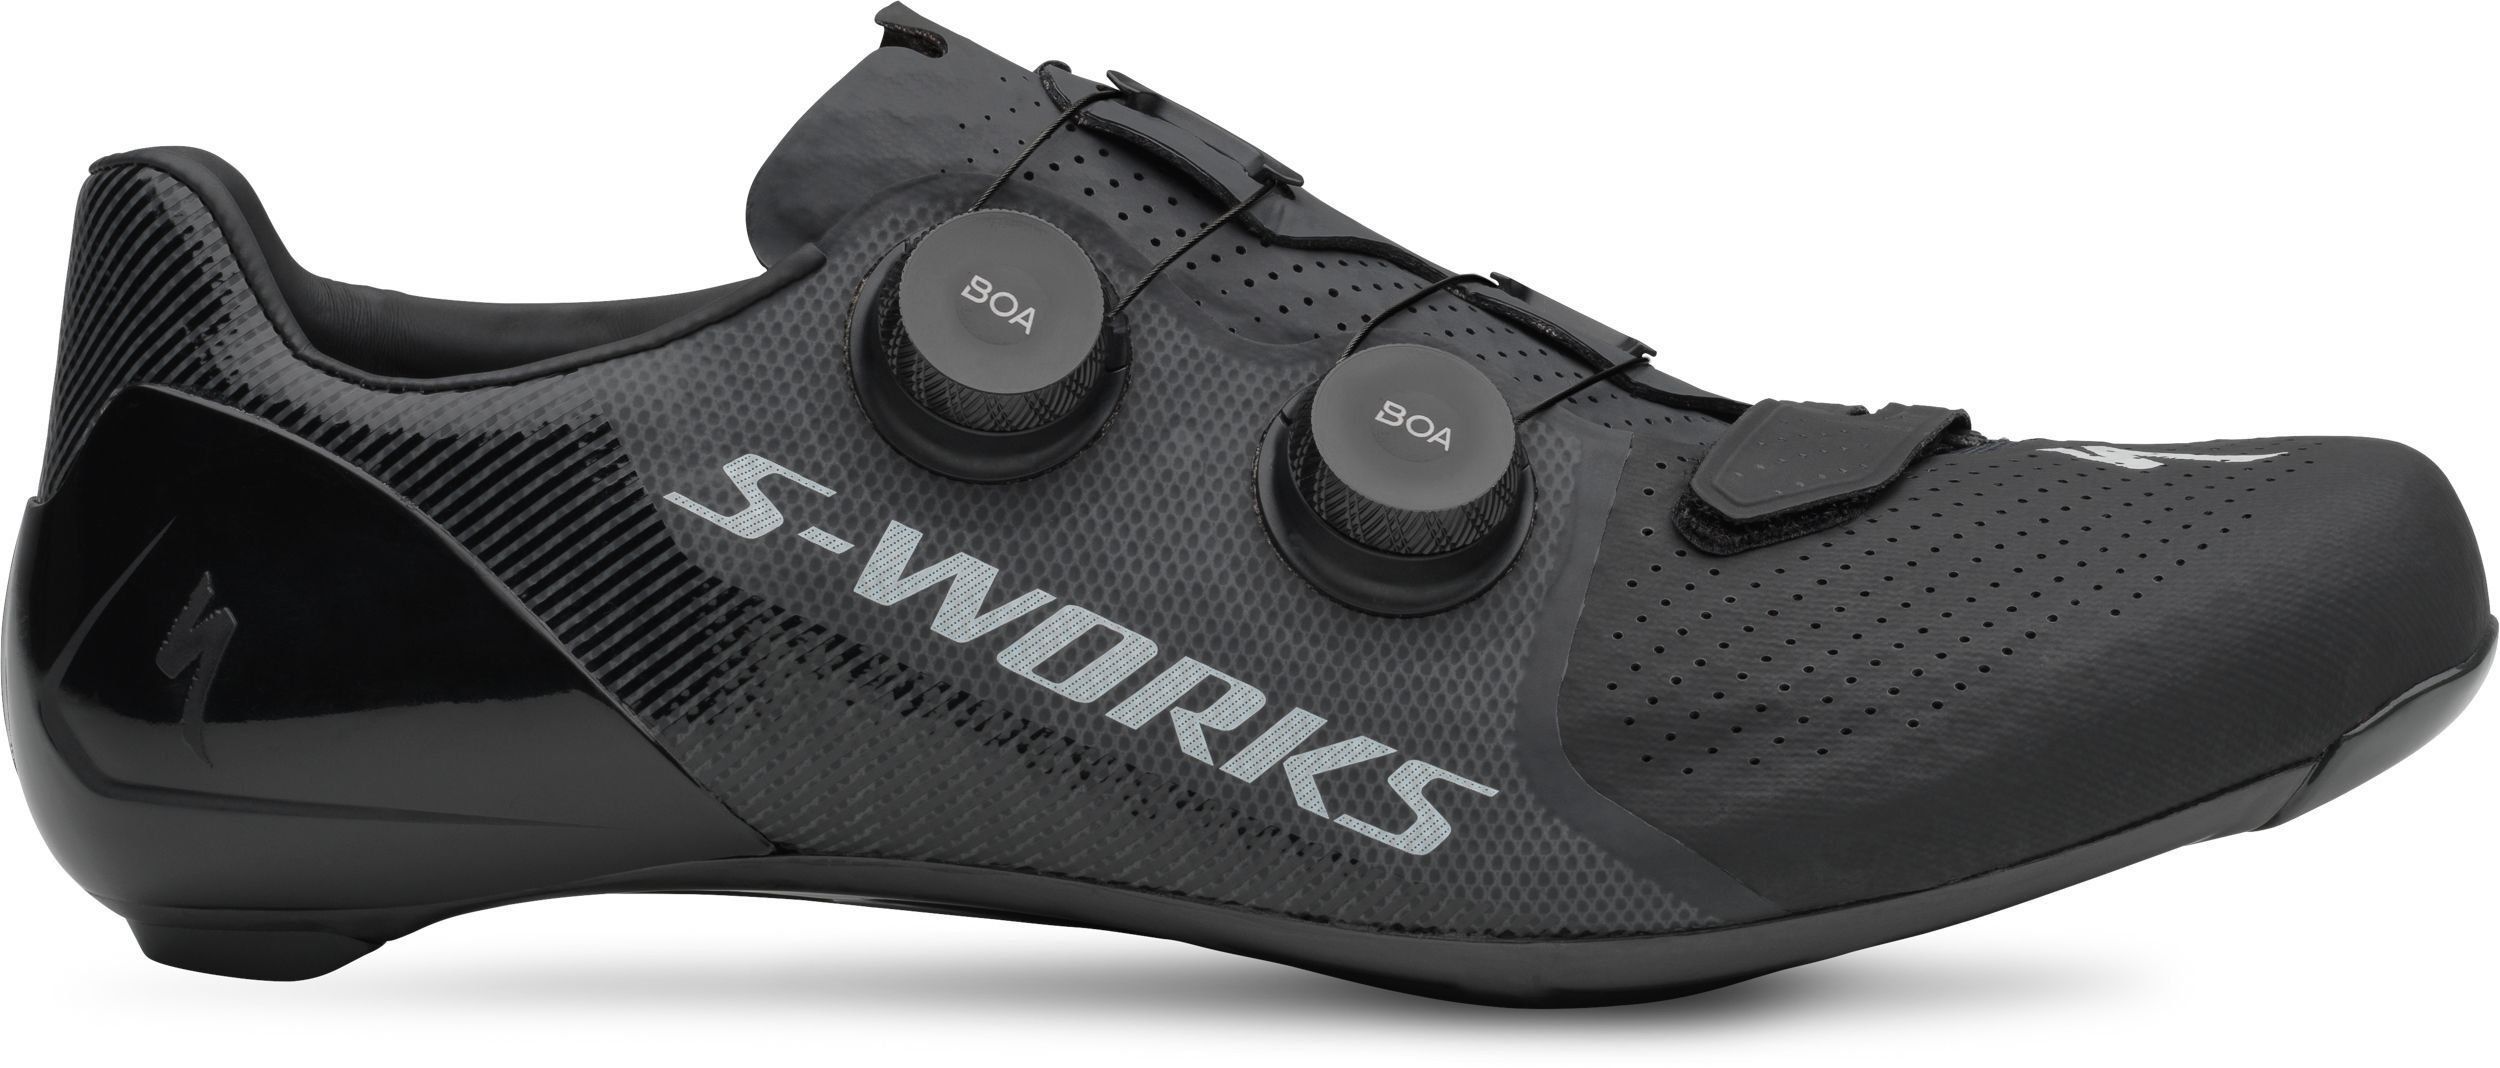 s works mtb shoes 2019